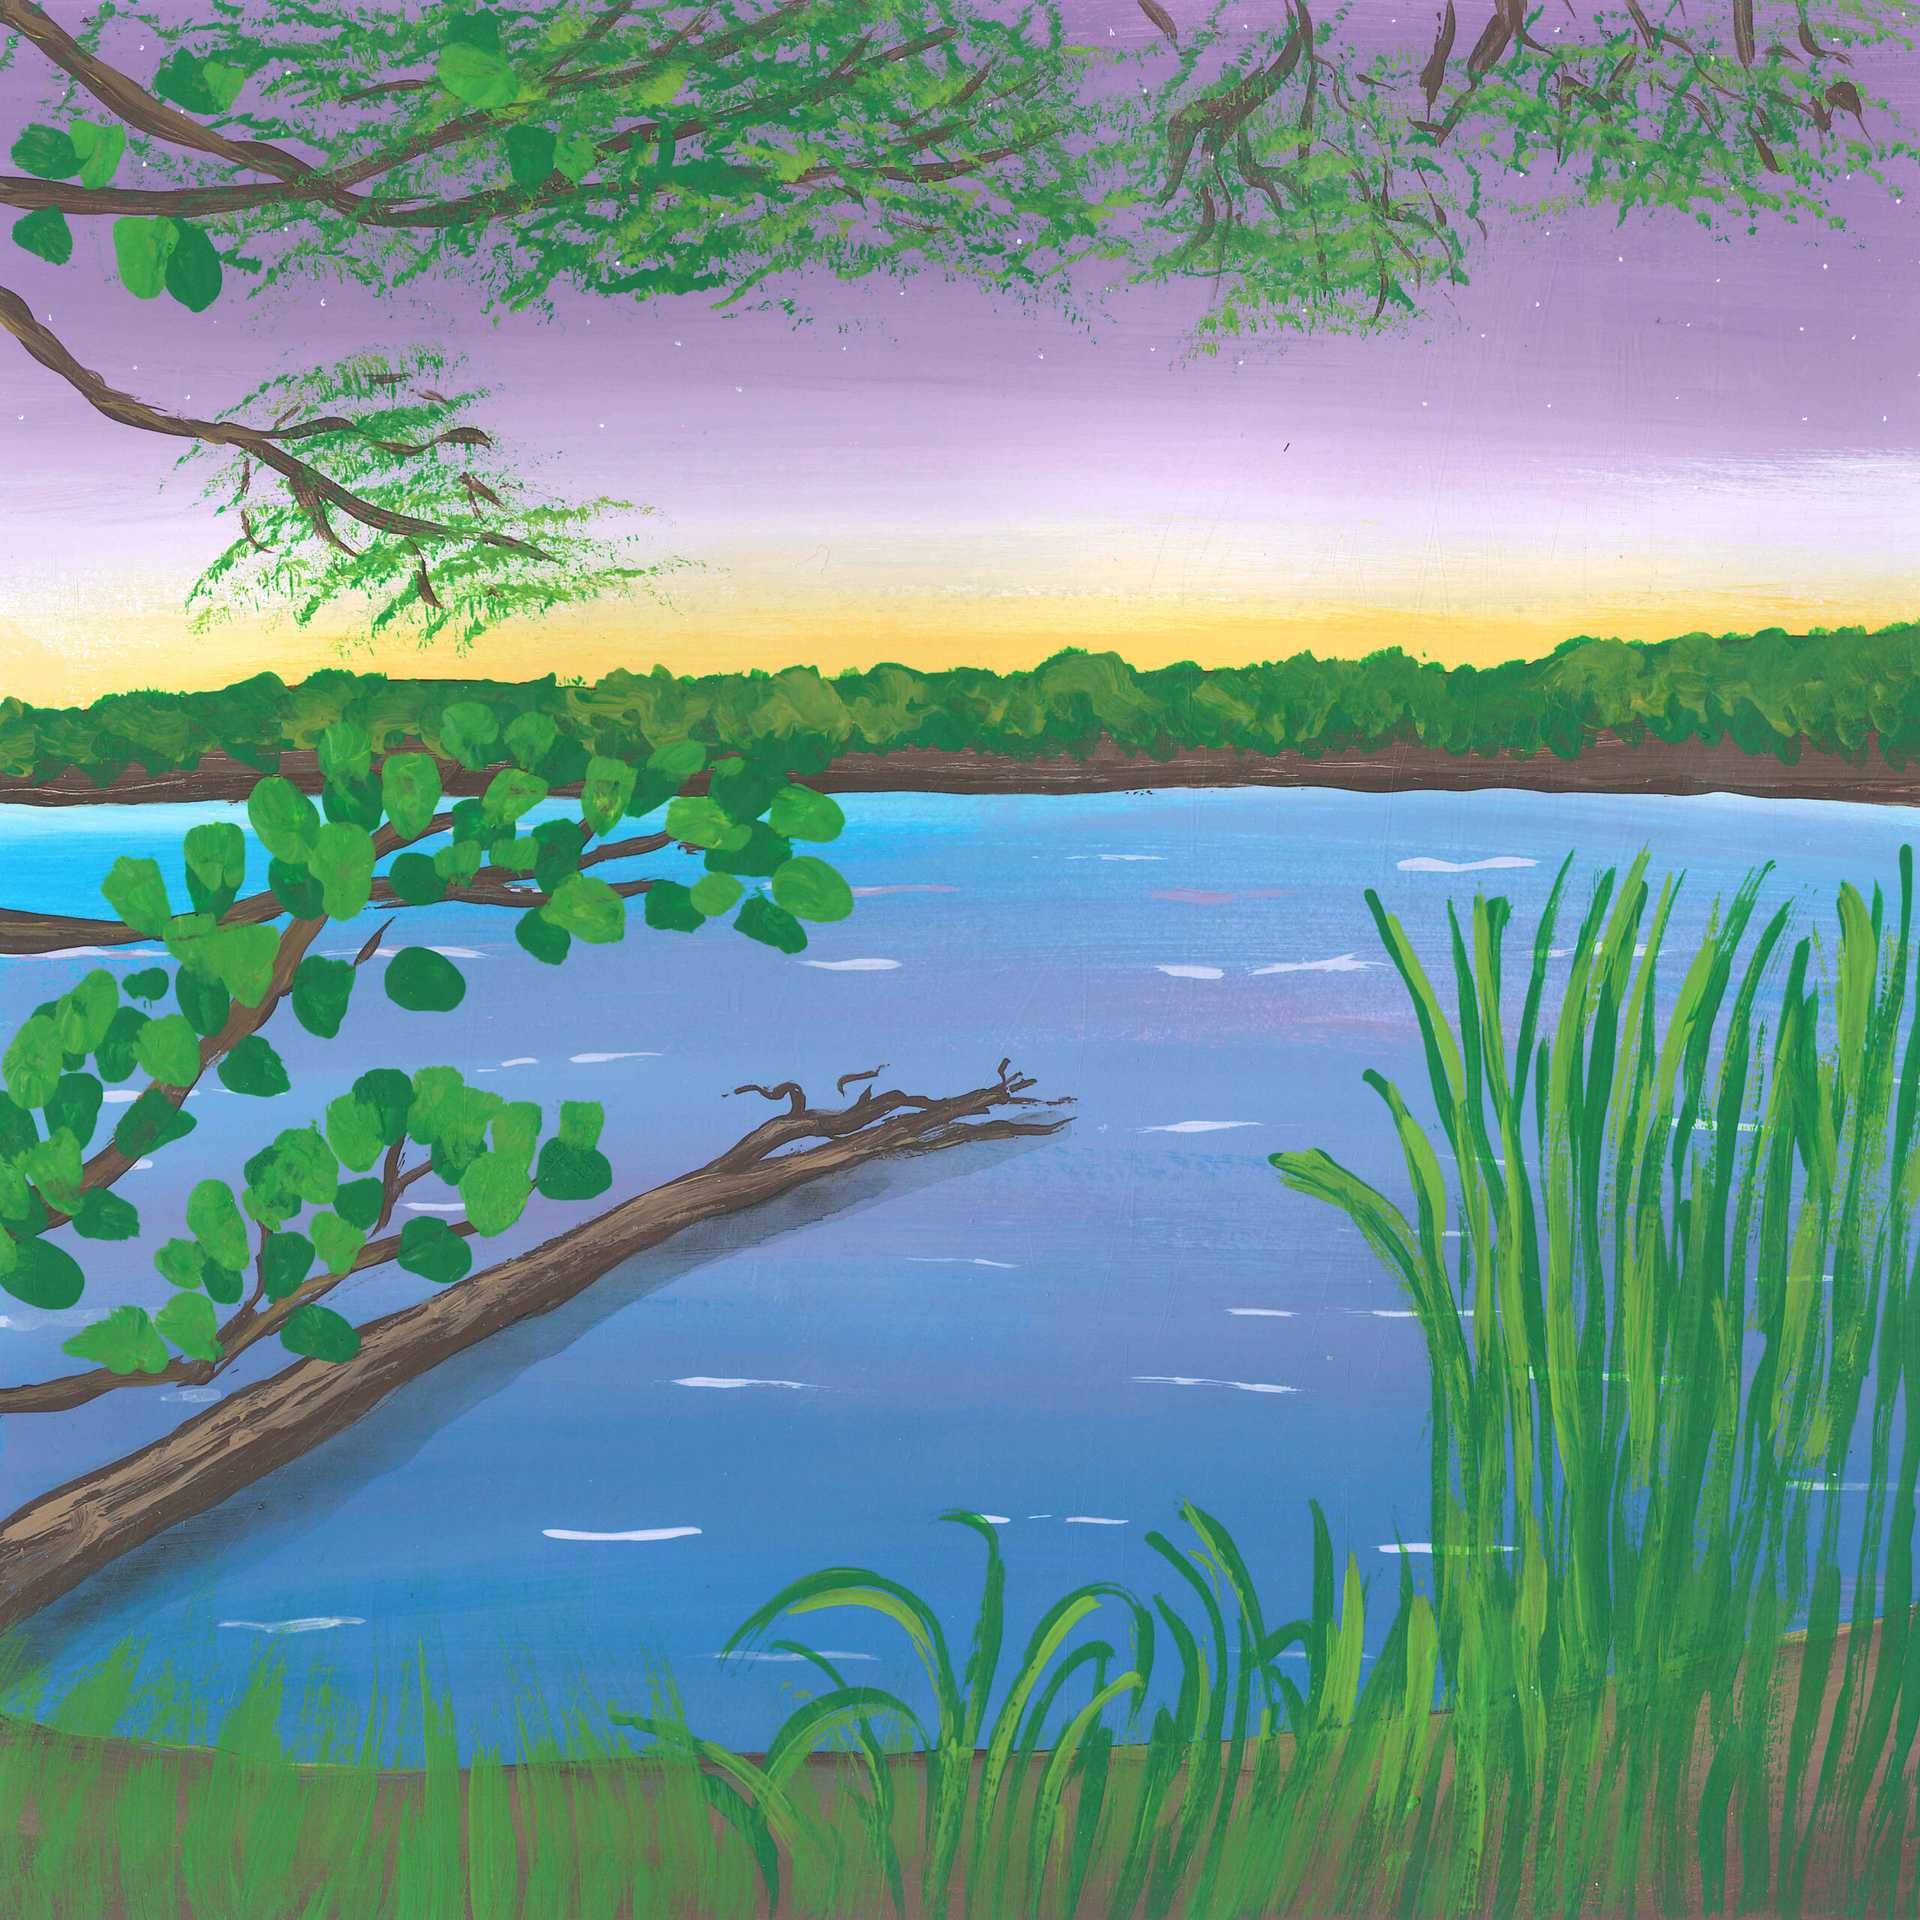 Early Morning by the Pond with Birds, Frogs and Beavers - nature landscape painting - earth.fm